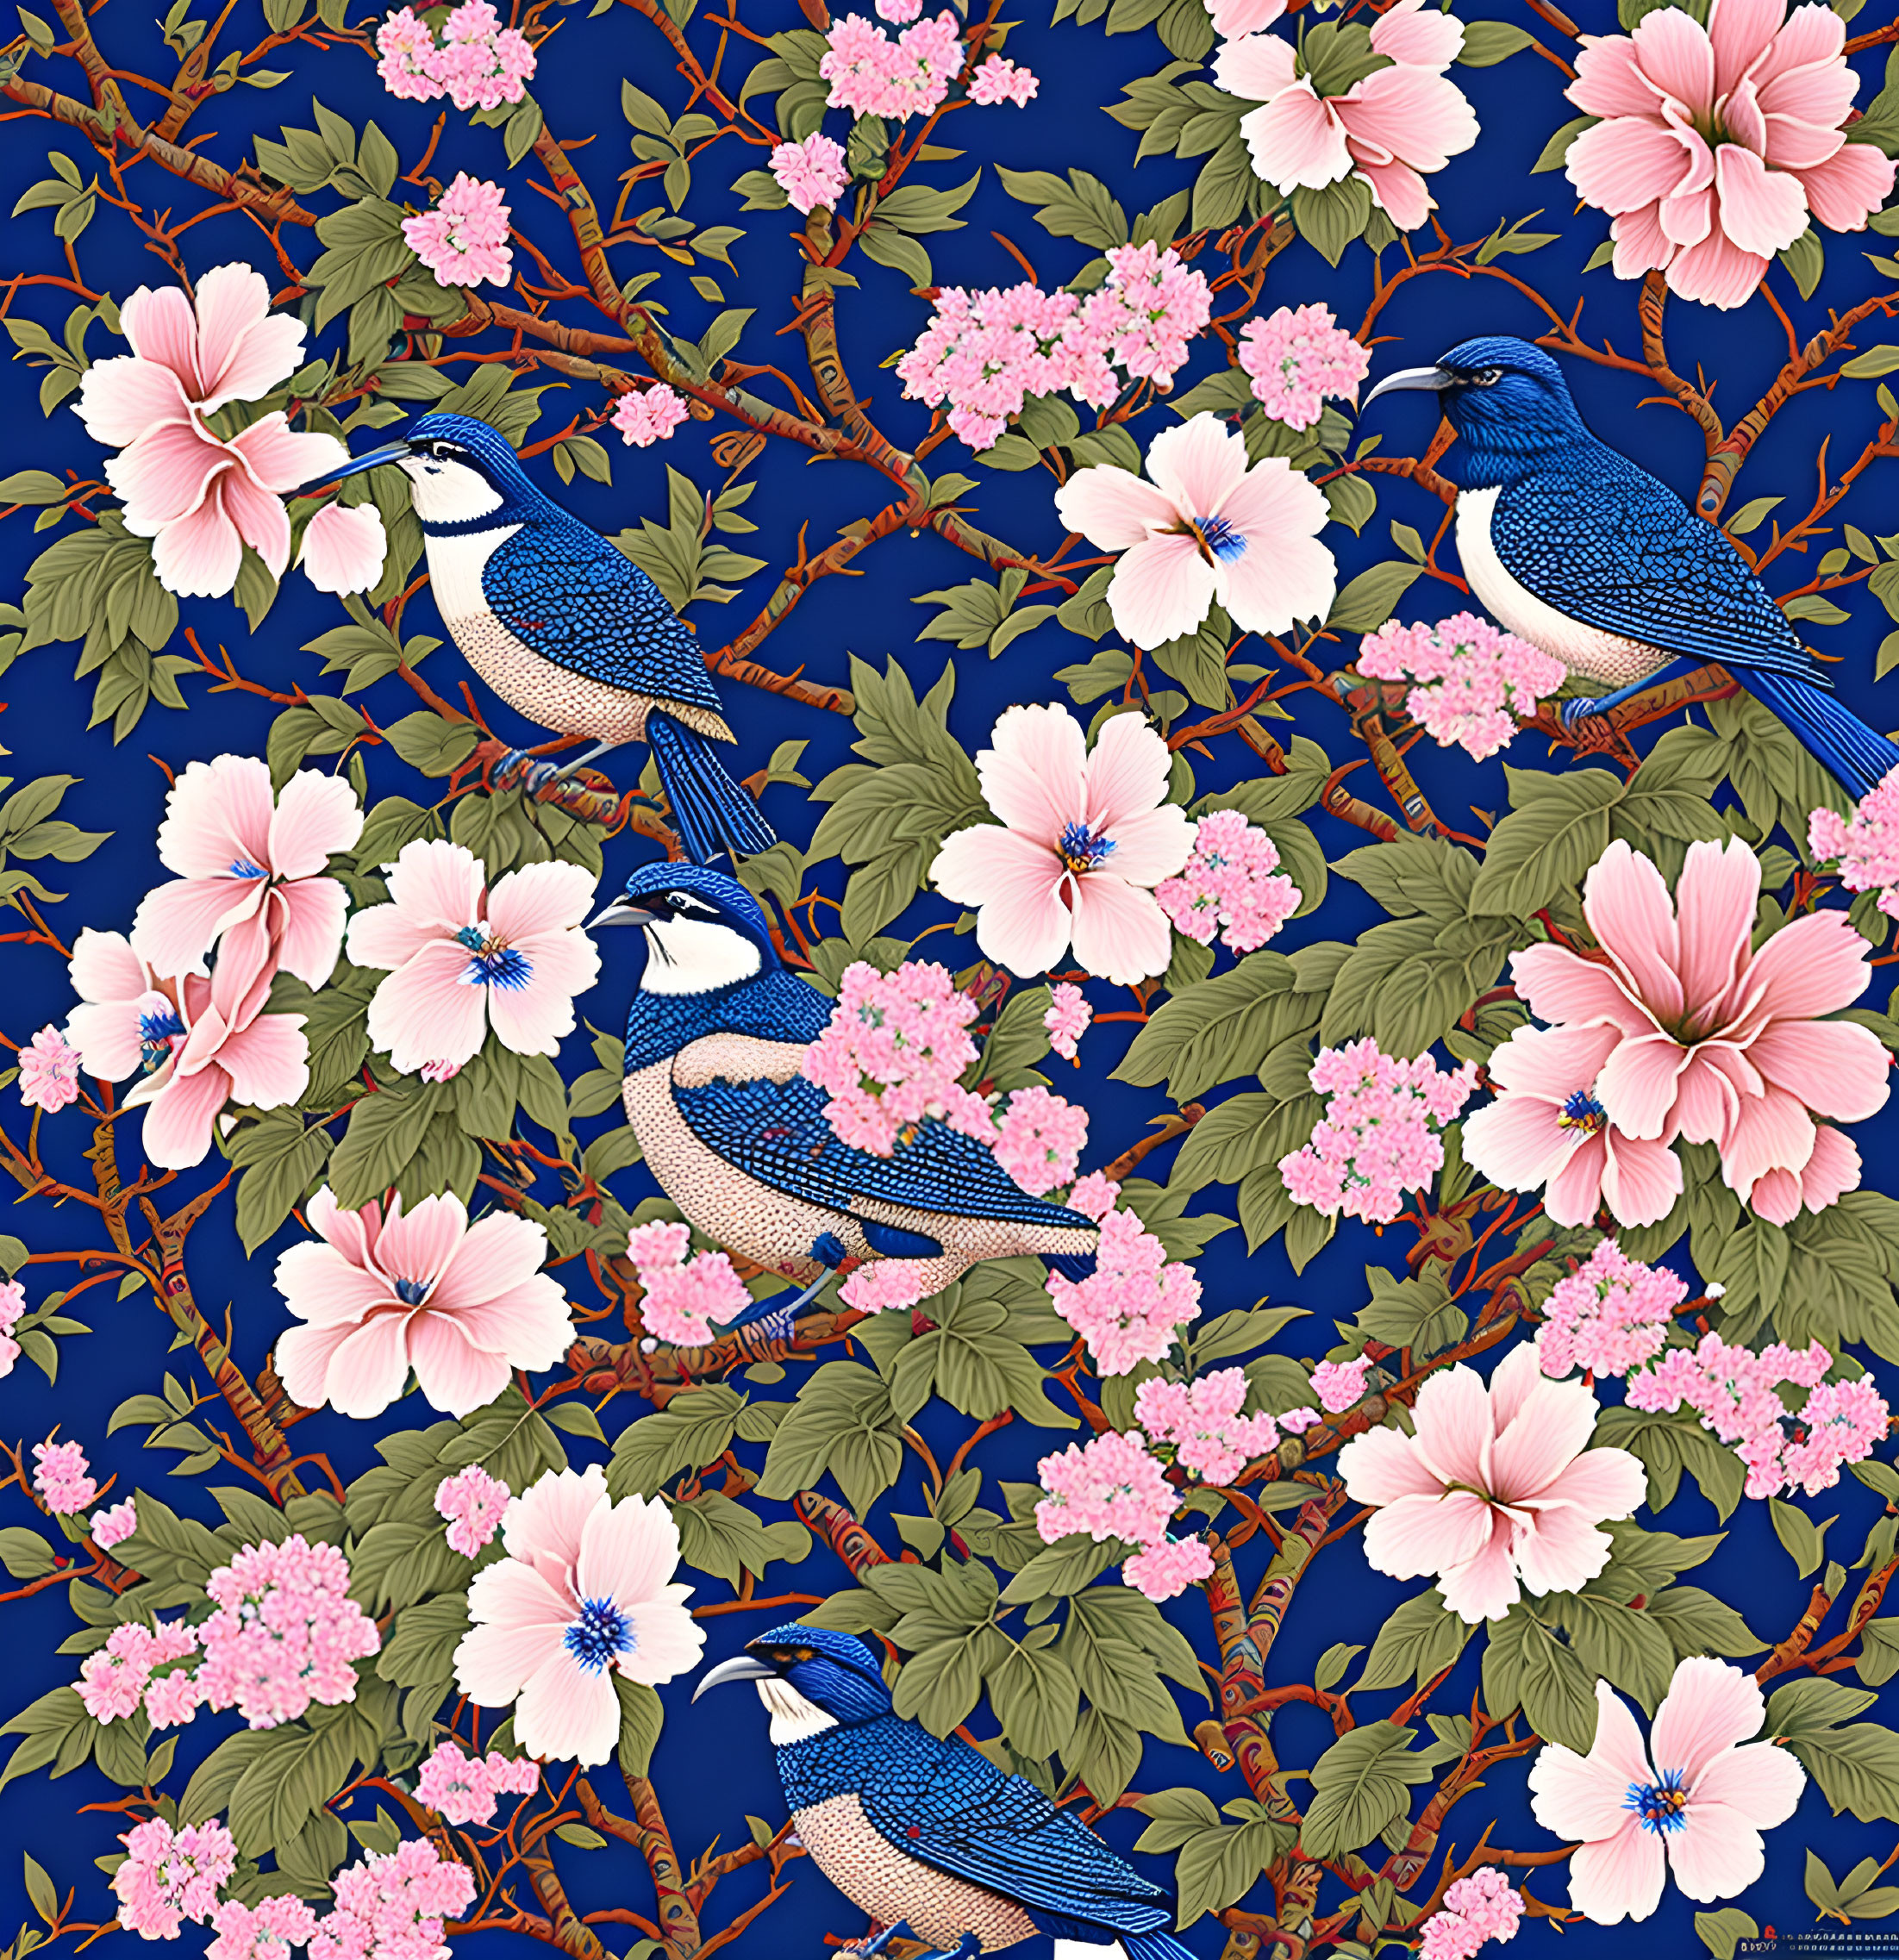 Whimsical Blue Bird Floral Tapestry